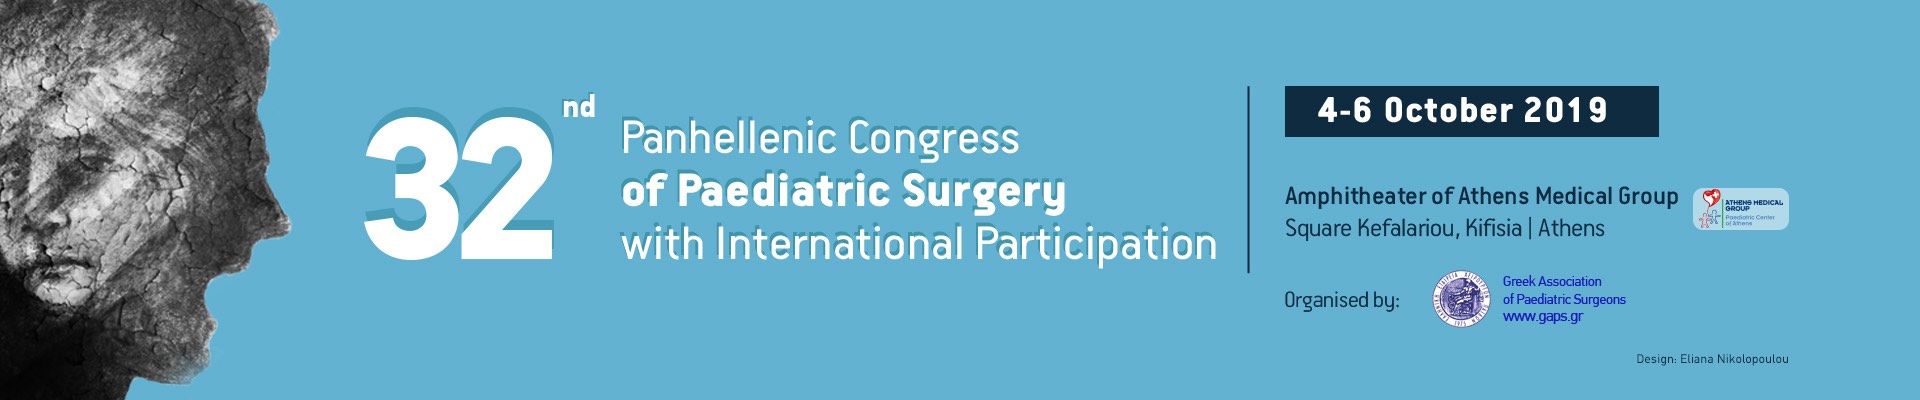 32nd Panhellenic Congress of Paediatric Surgery with Clinical Colorectal Course and Workshop for Paediatric Surgeons